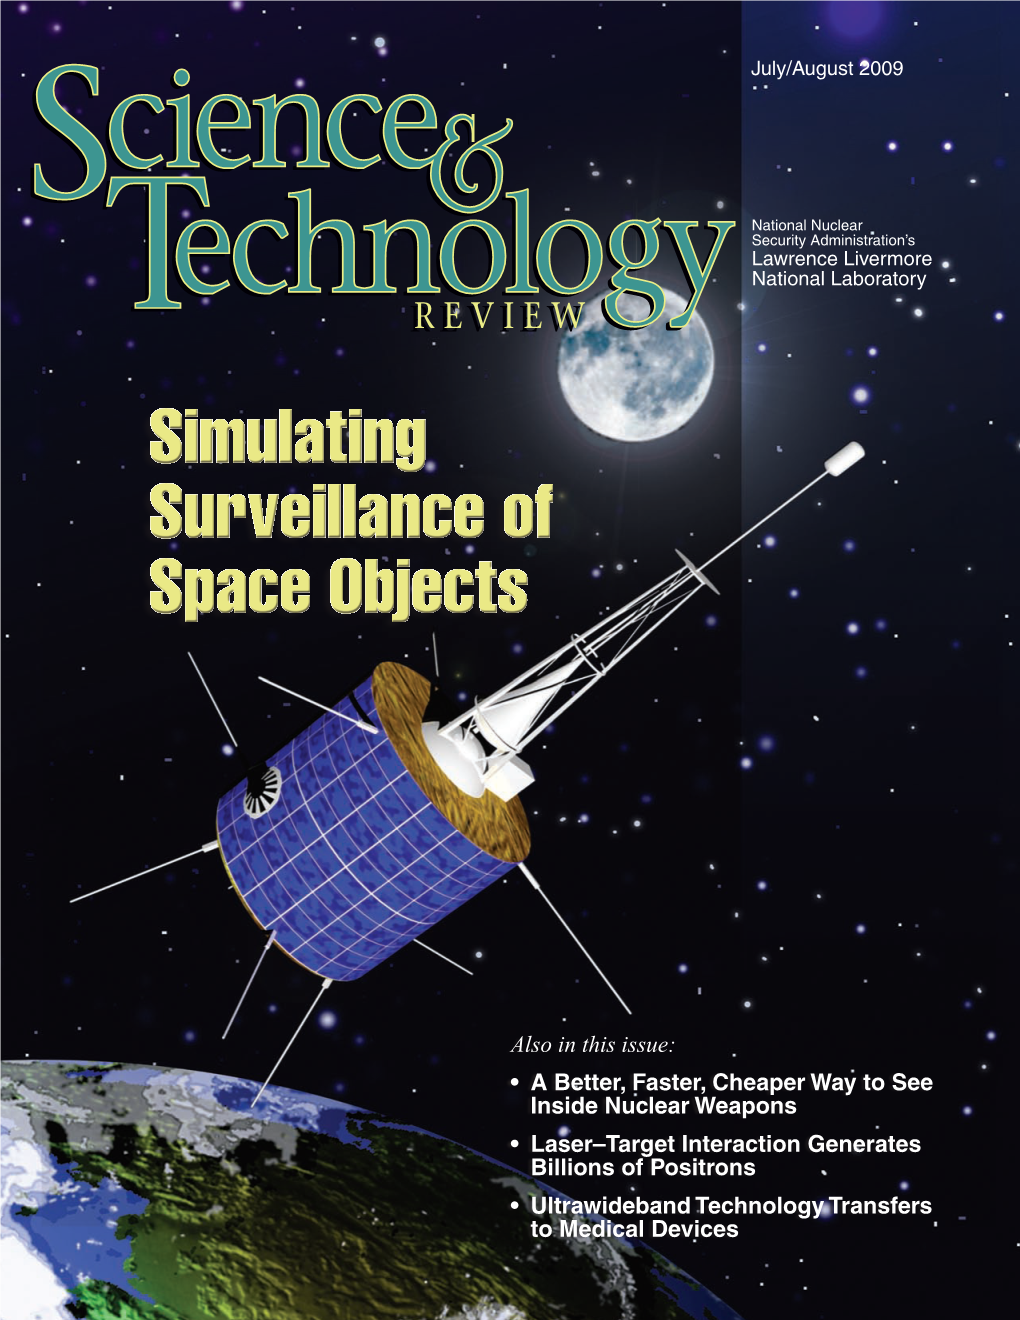 Simulating Surveillance of Space Objects